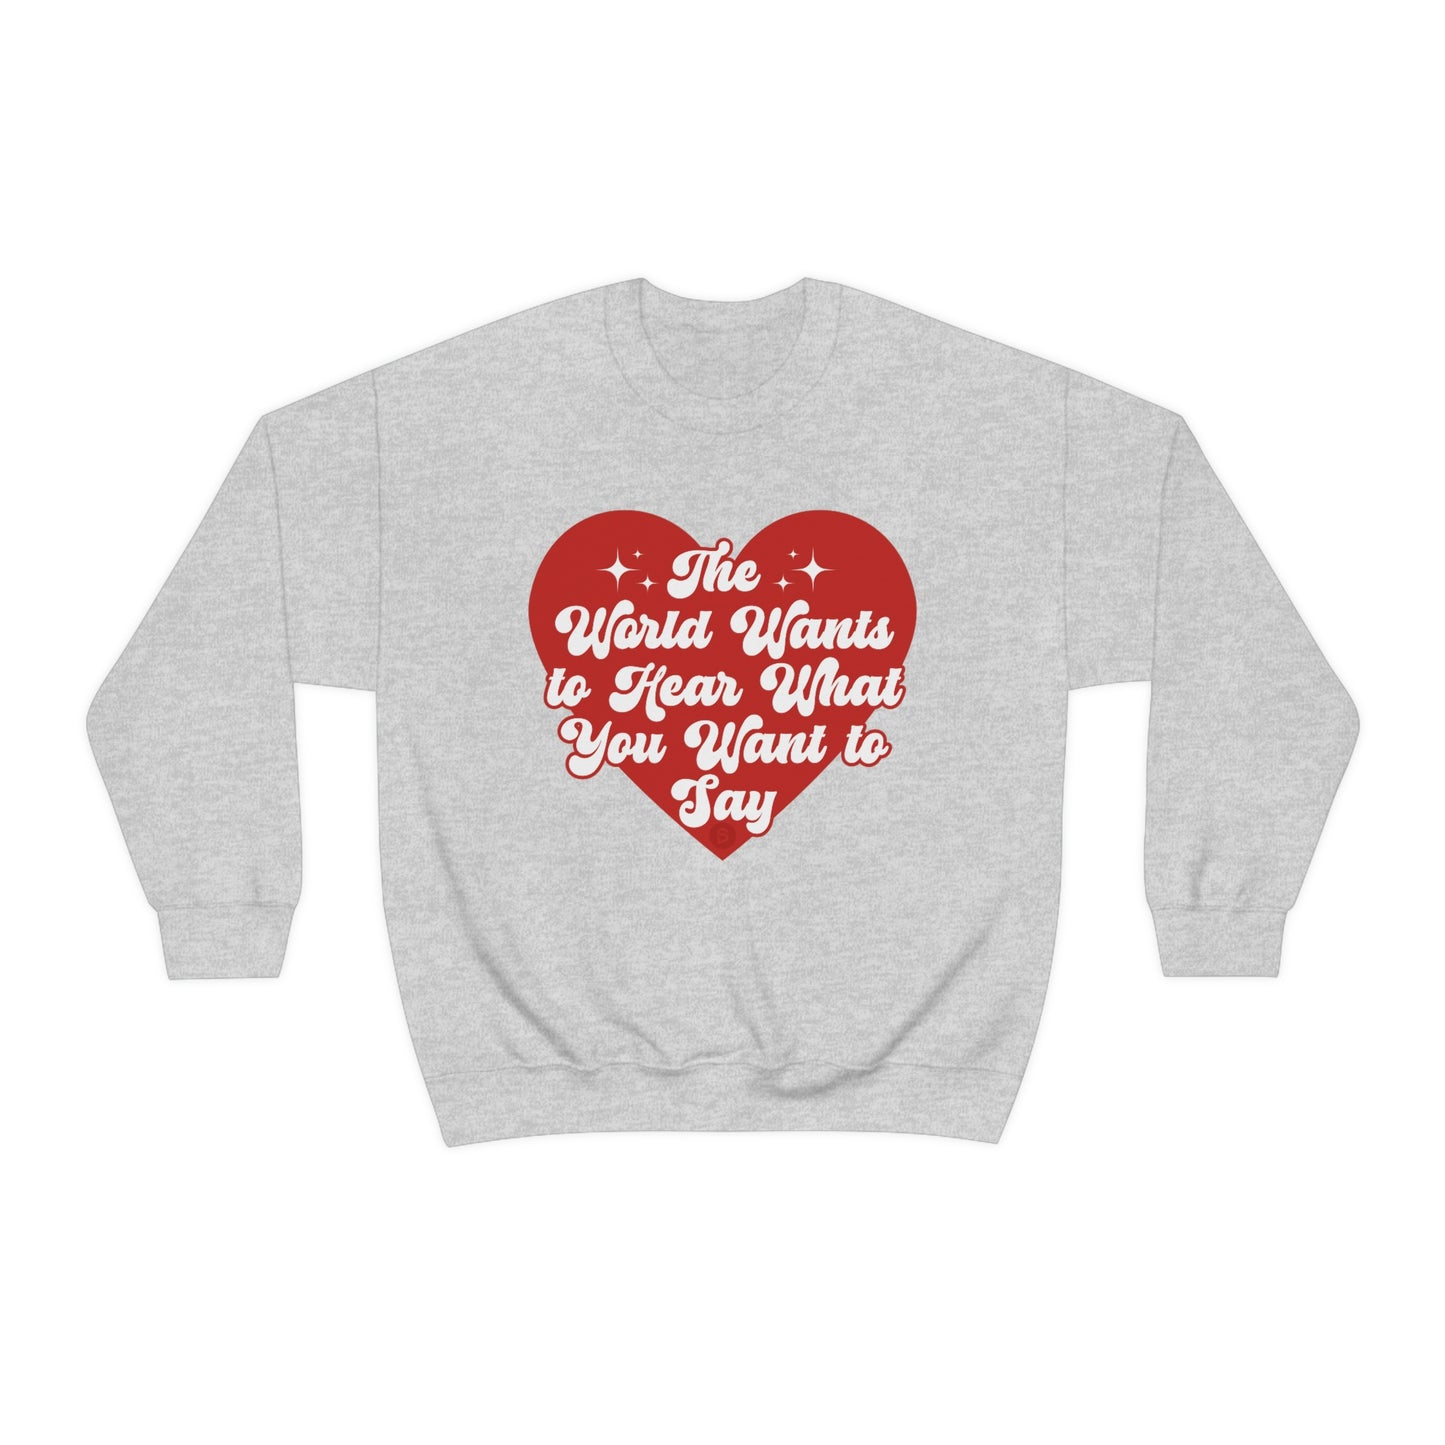 The World Wants to Hear What You Want to Say Crewneck